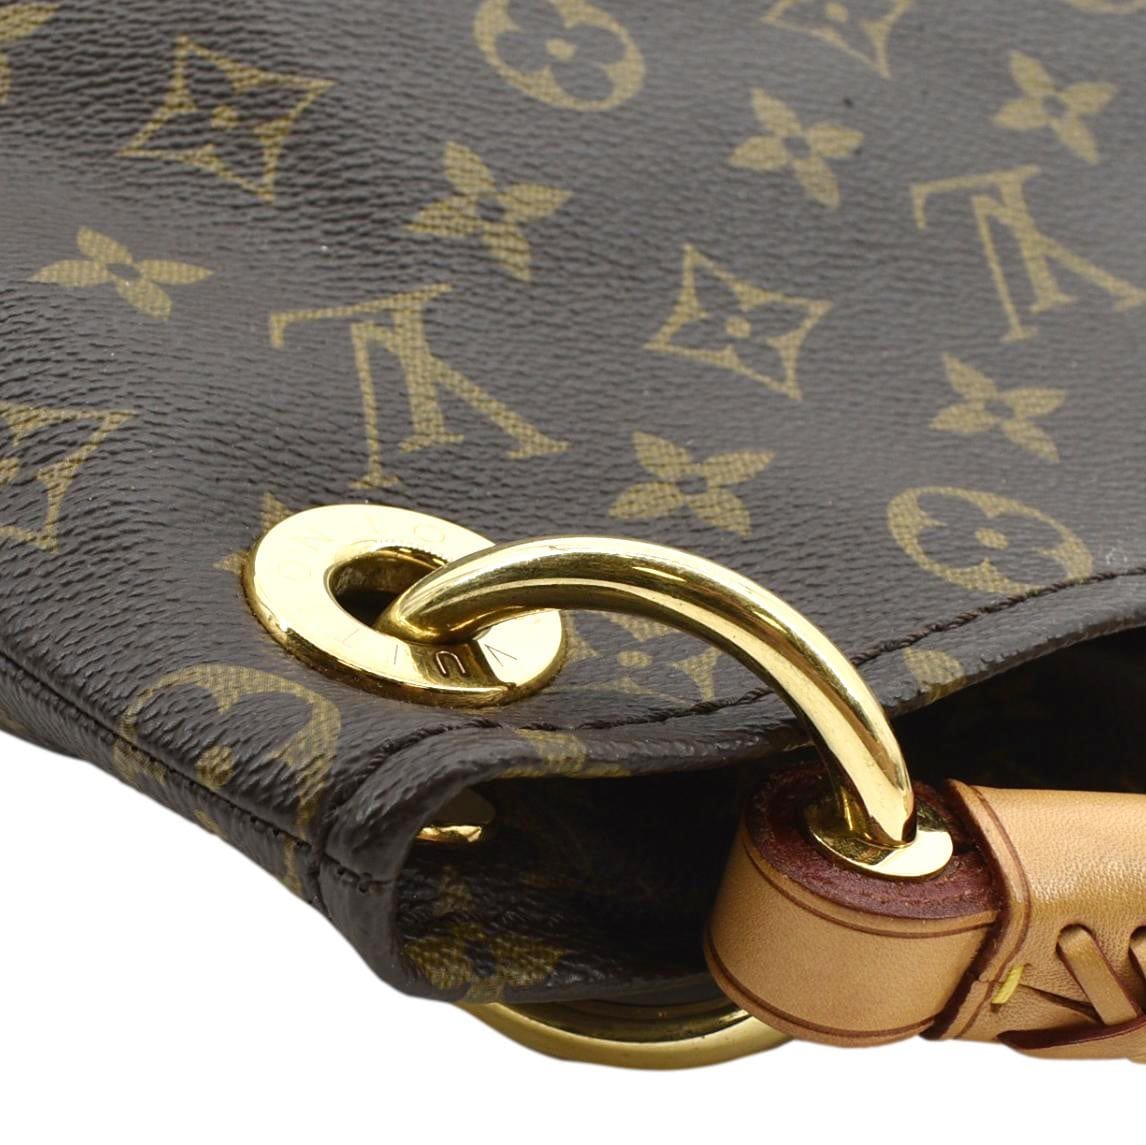 braided leather purse strap for lv artsybag